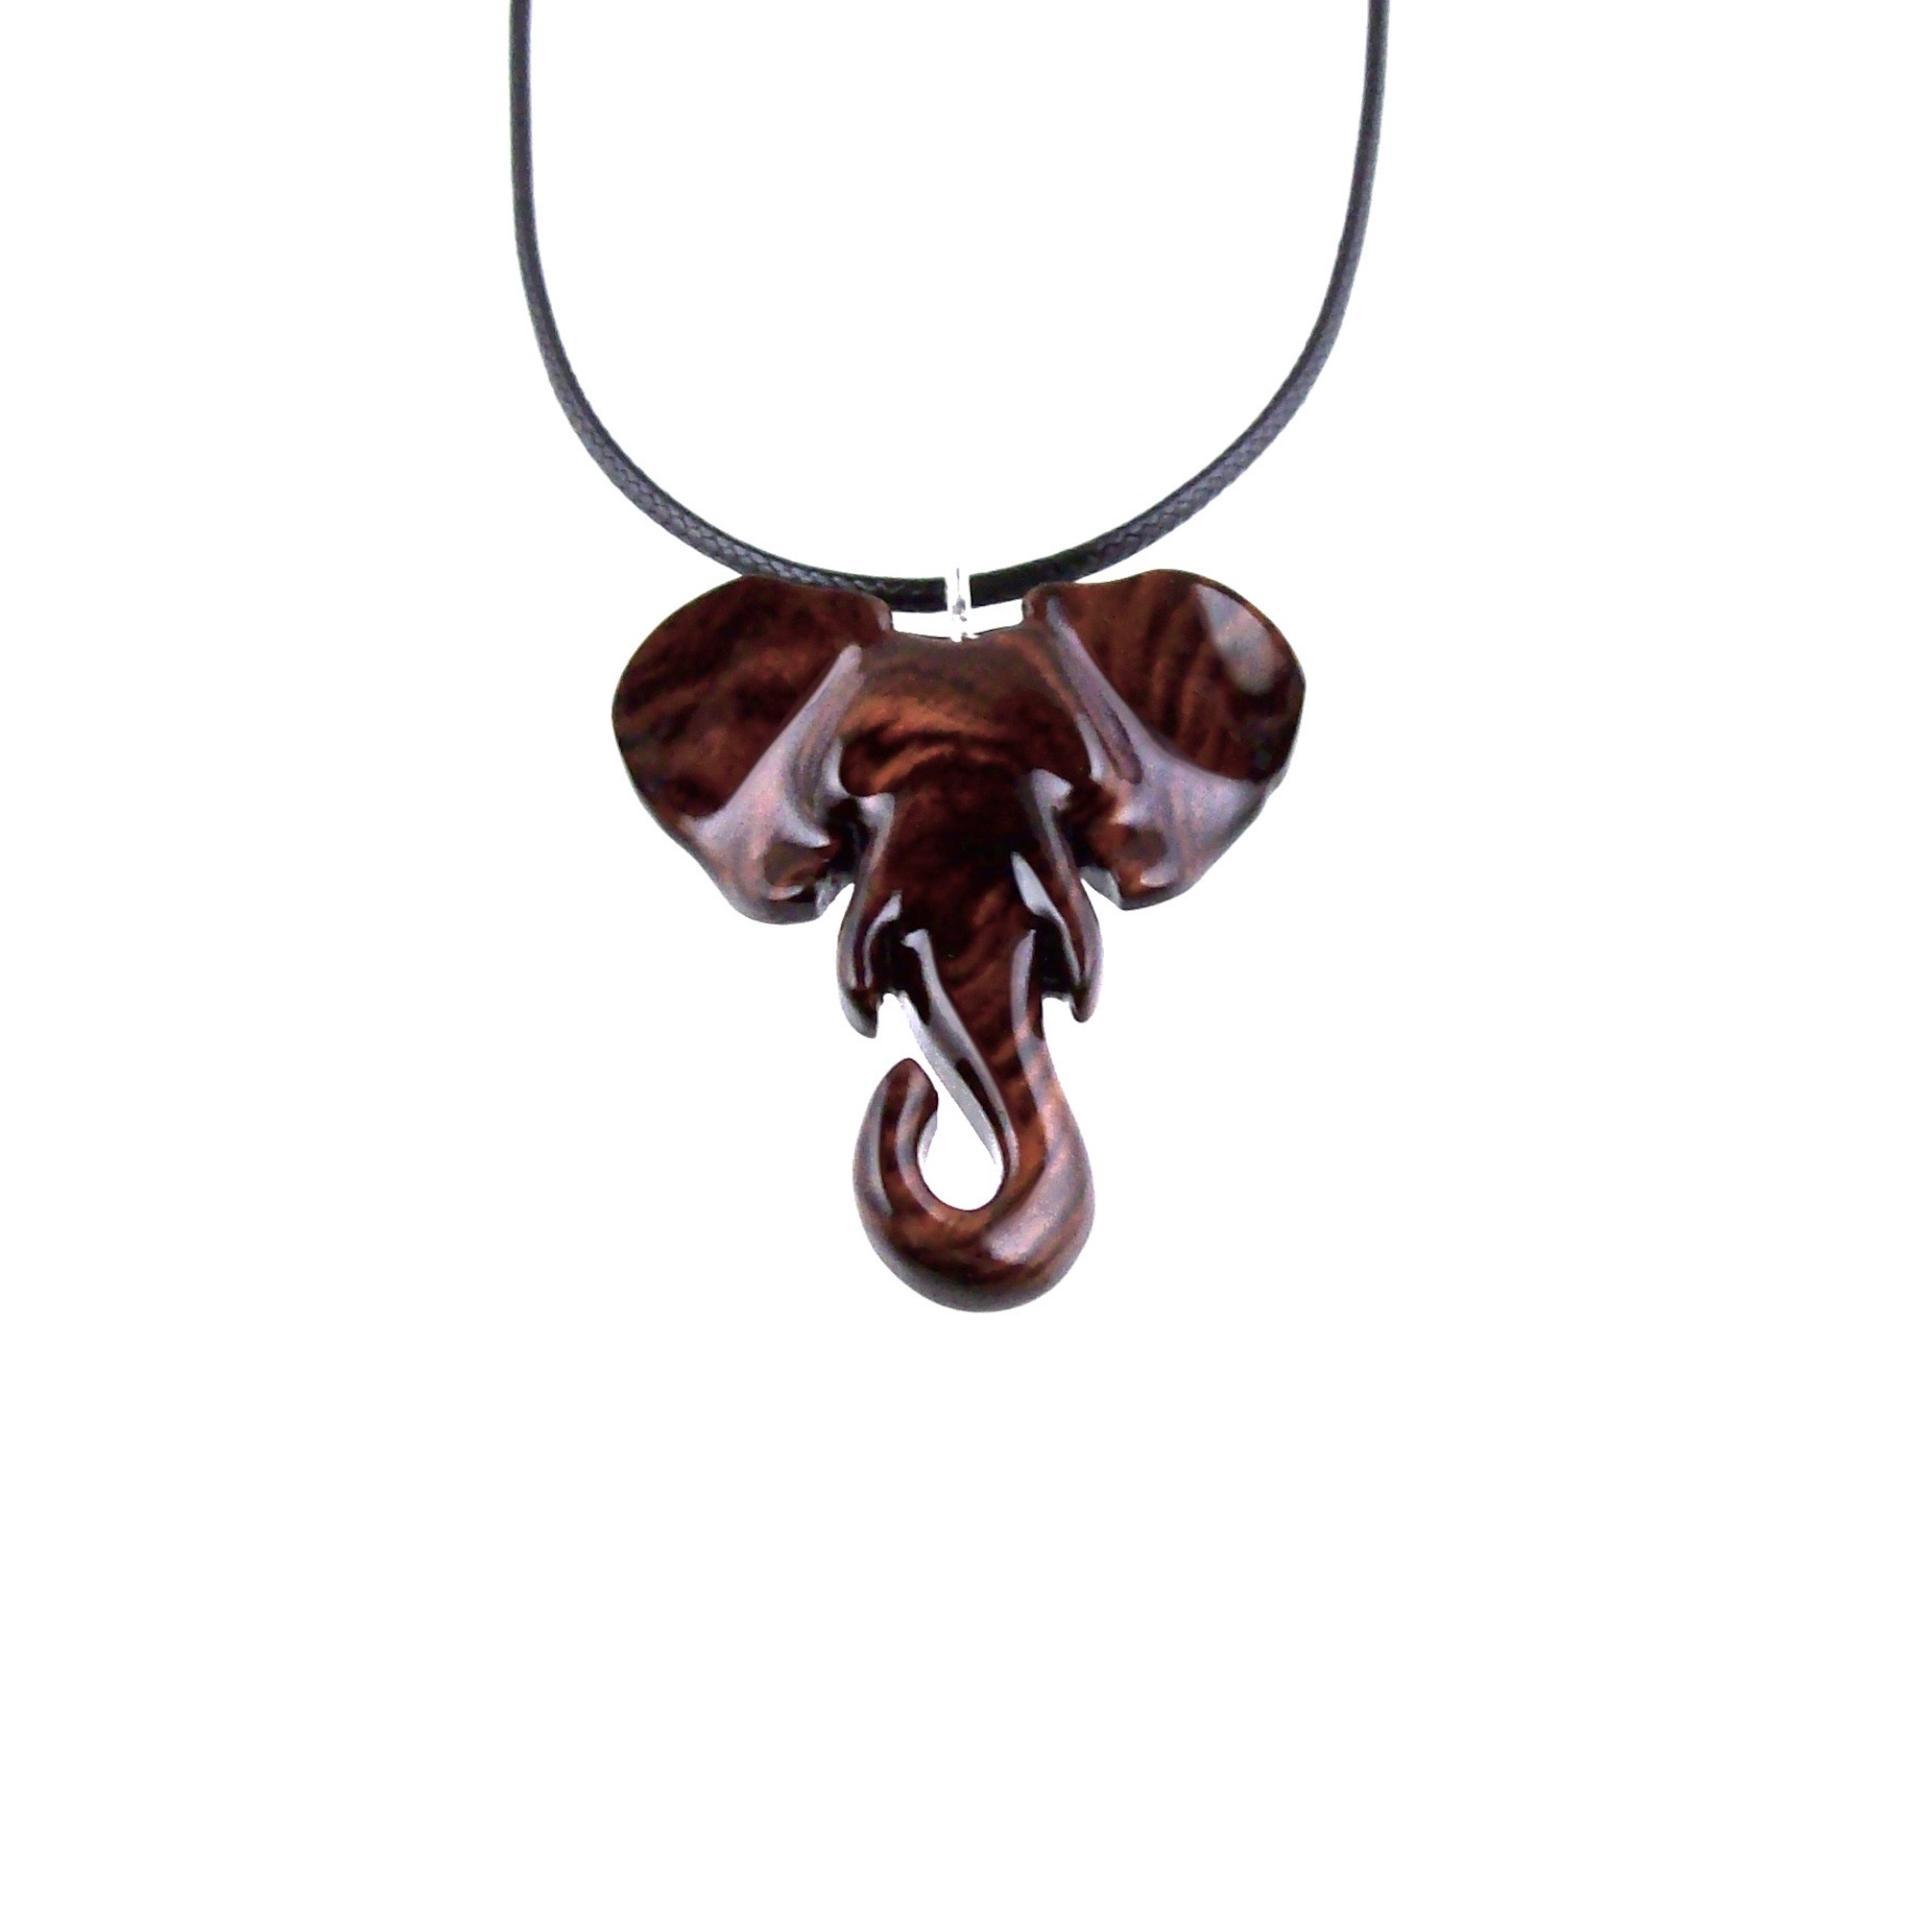 Elephant Necklace, Wooden Elephant Pendant for Men or Women, Hand Carved Spiritual Animal Necklace, Wood Jewelry for Men Women